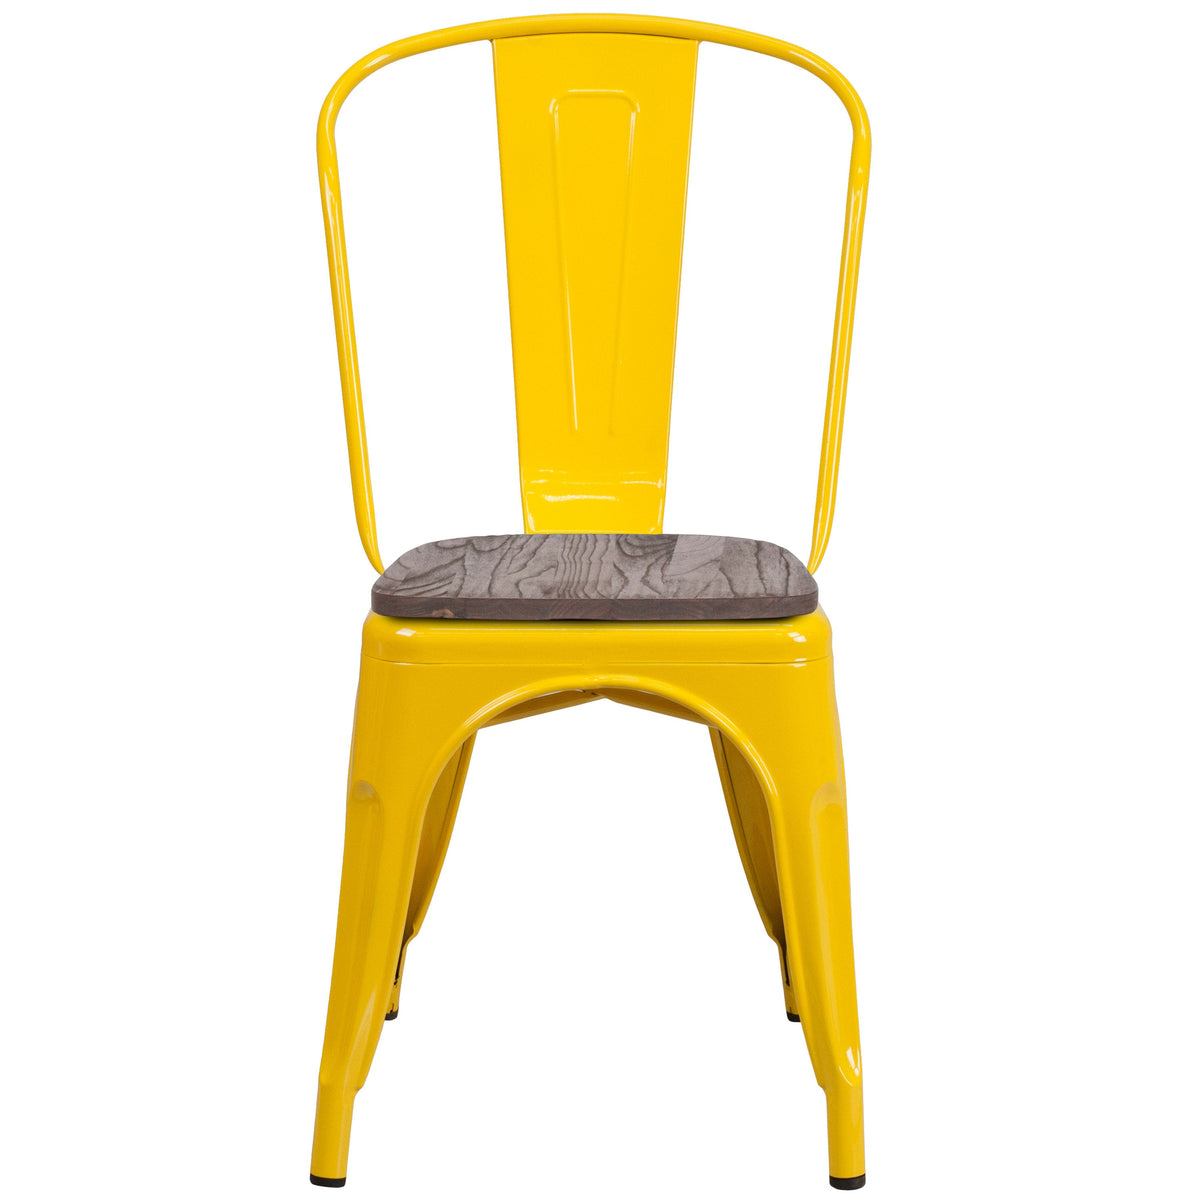 Yellow |#| Yellow Metal Stackable Chair with Wood Seat - Restaurant Chair - Bistro Chair